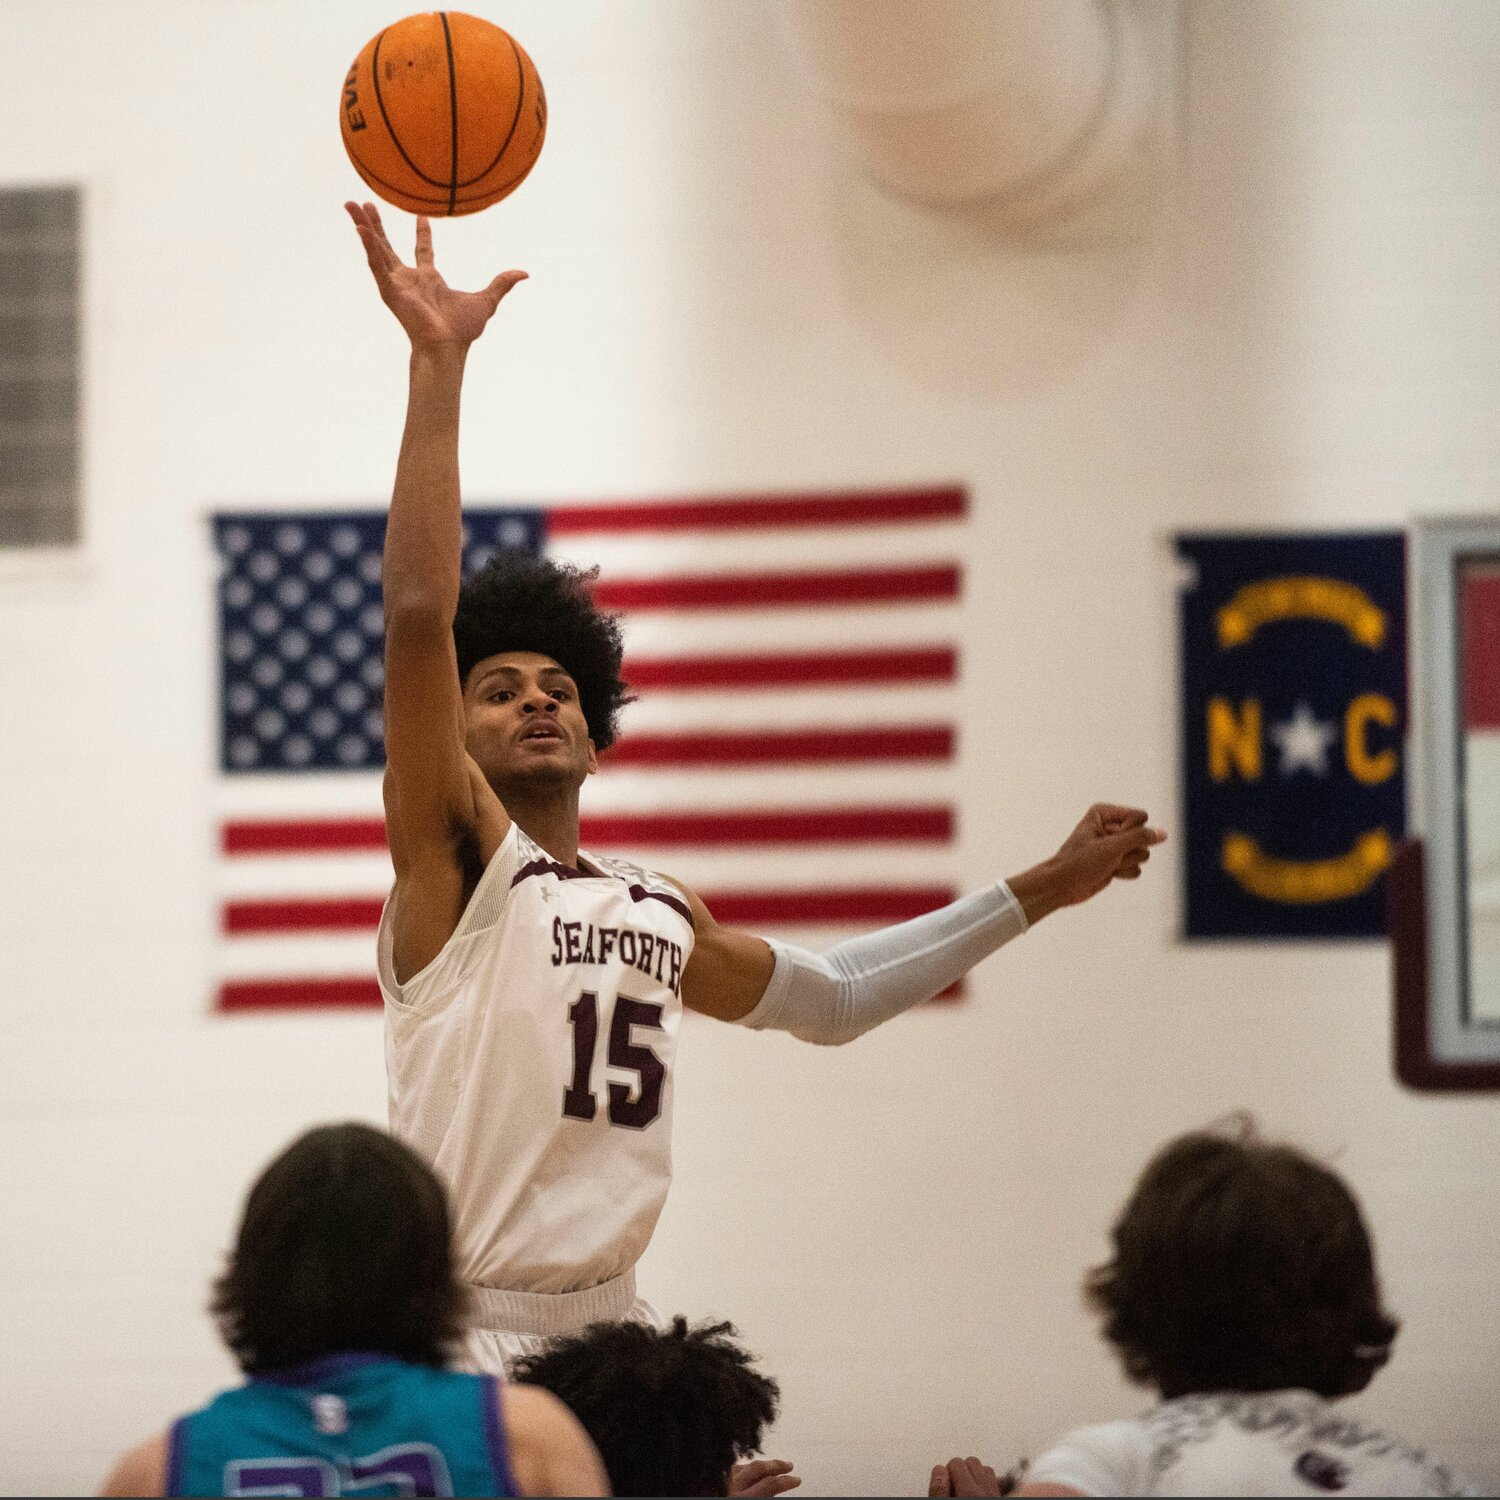 Jarin Stevenson committed to the University of Alabama on Wednesday. He scored 1,011 career points over the past two seasons at Seaforth, an average of 21.1 per game.